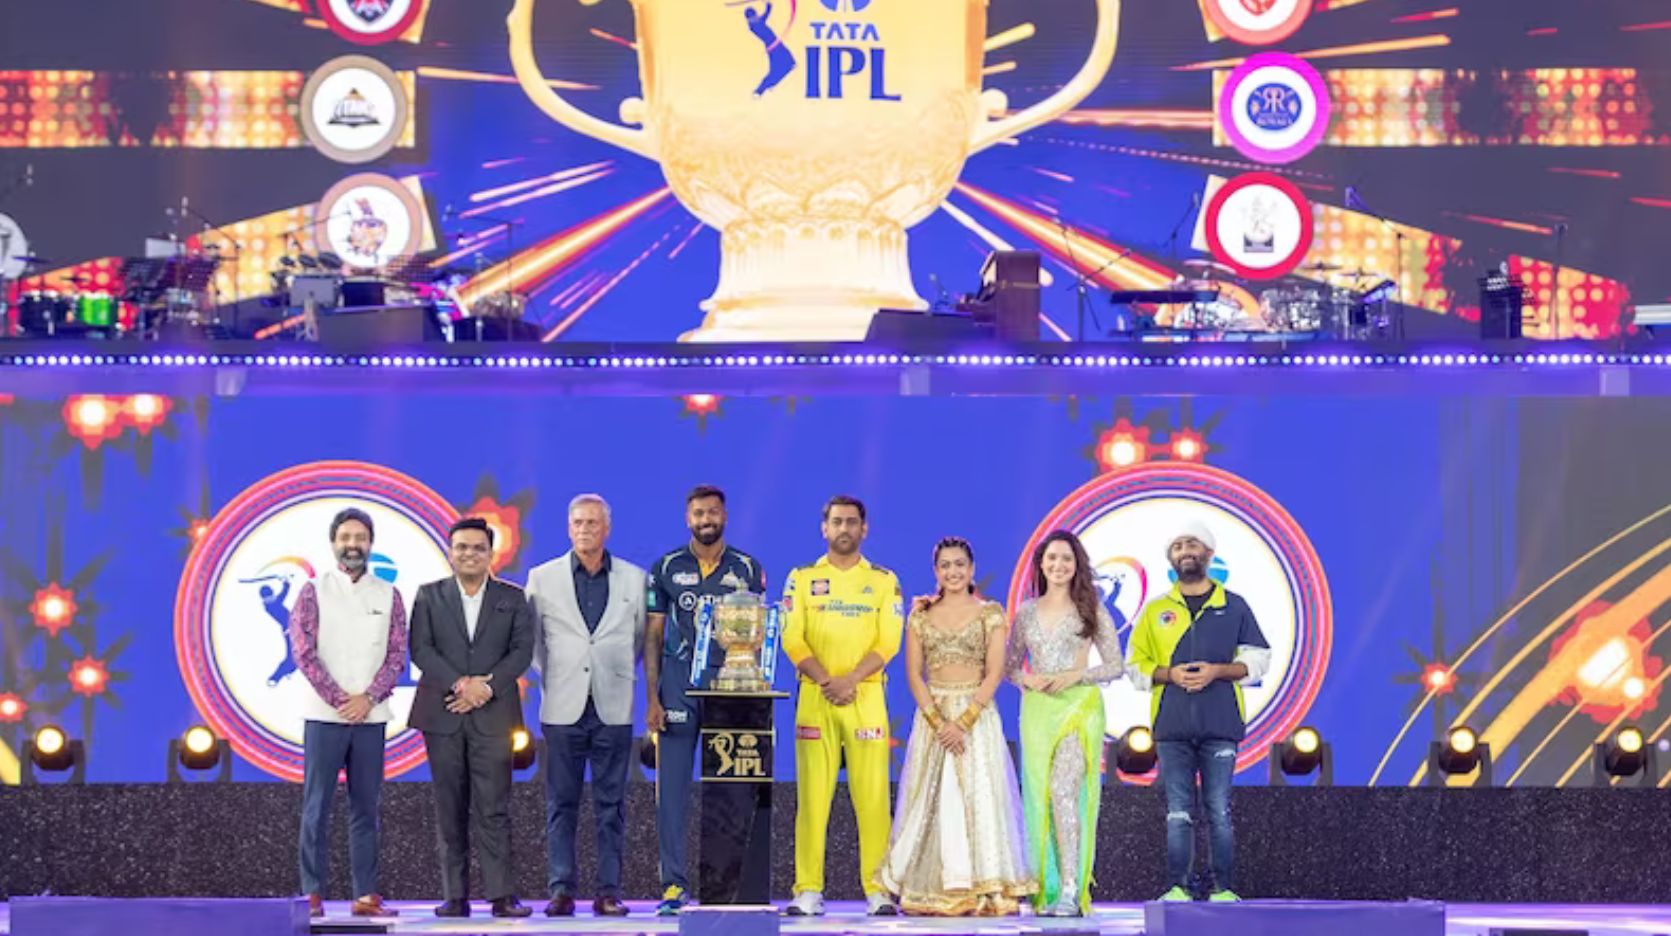 IPL discussion and 2023 news